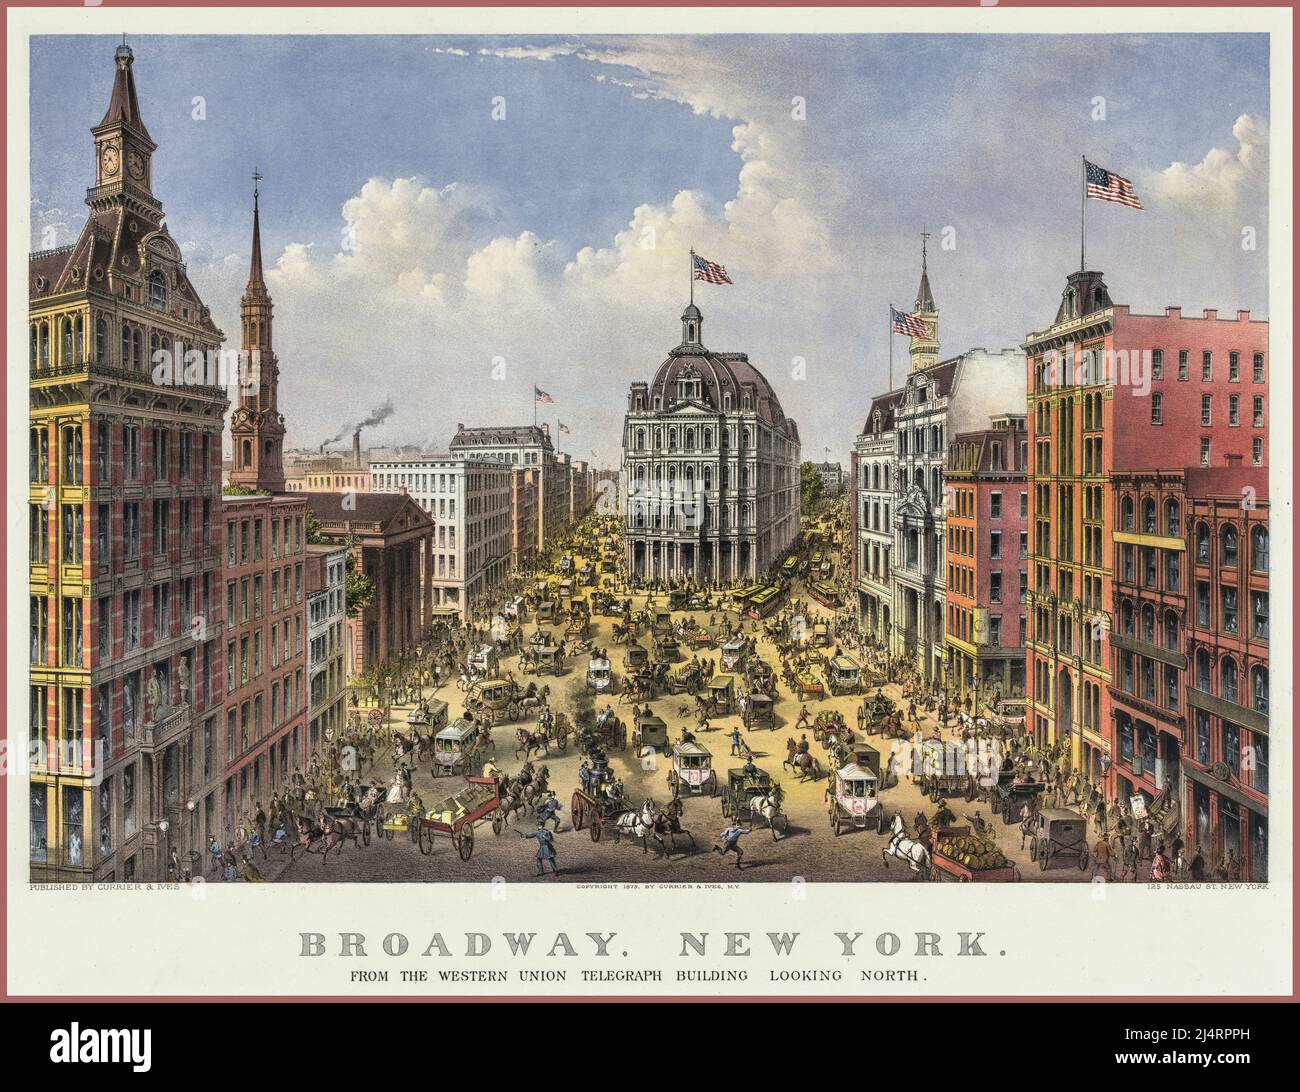 Vintage 1800s lithograph BROADWAY Manhattan New York USA from the Western Union Telegraph Building looking north. America USA Illustration by Currier  & Ives Stock Photo